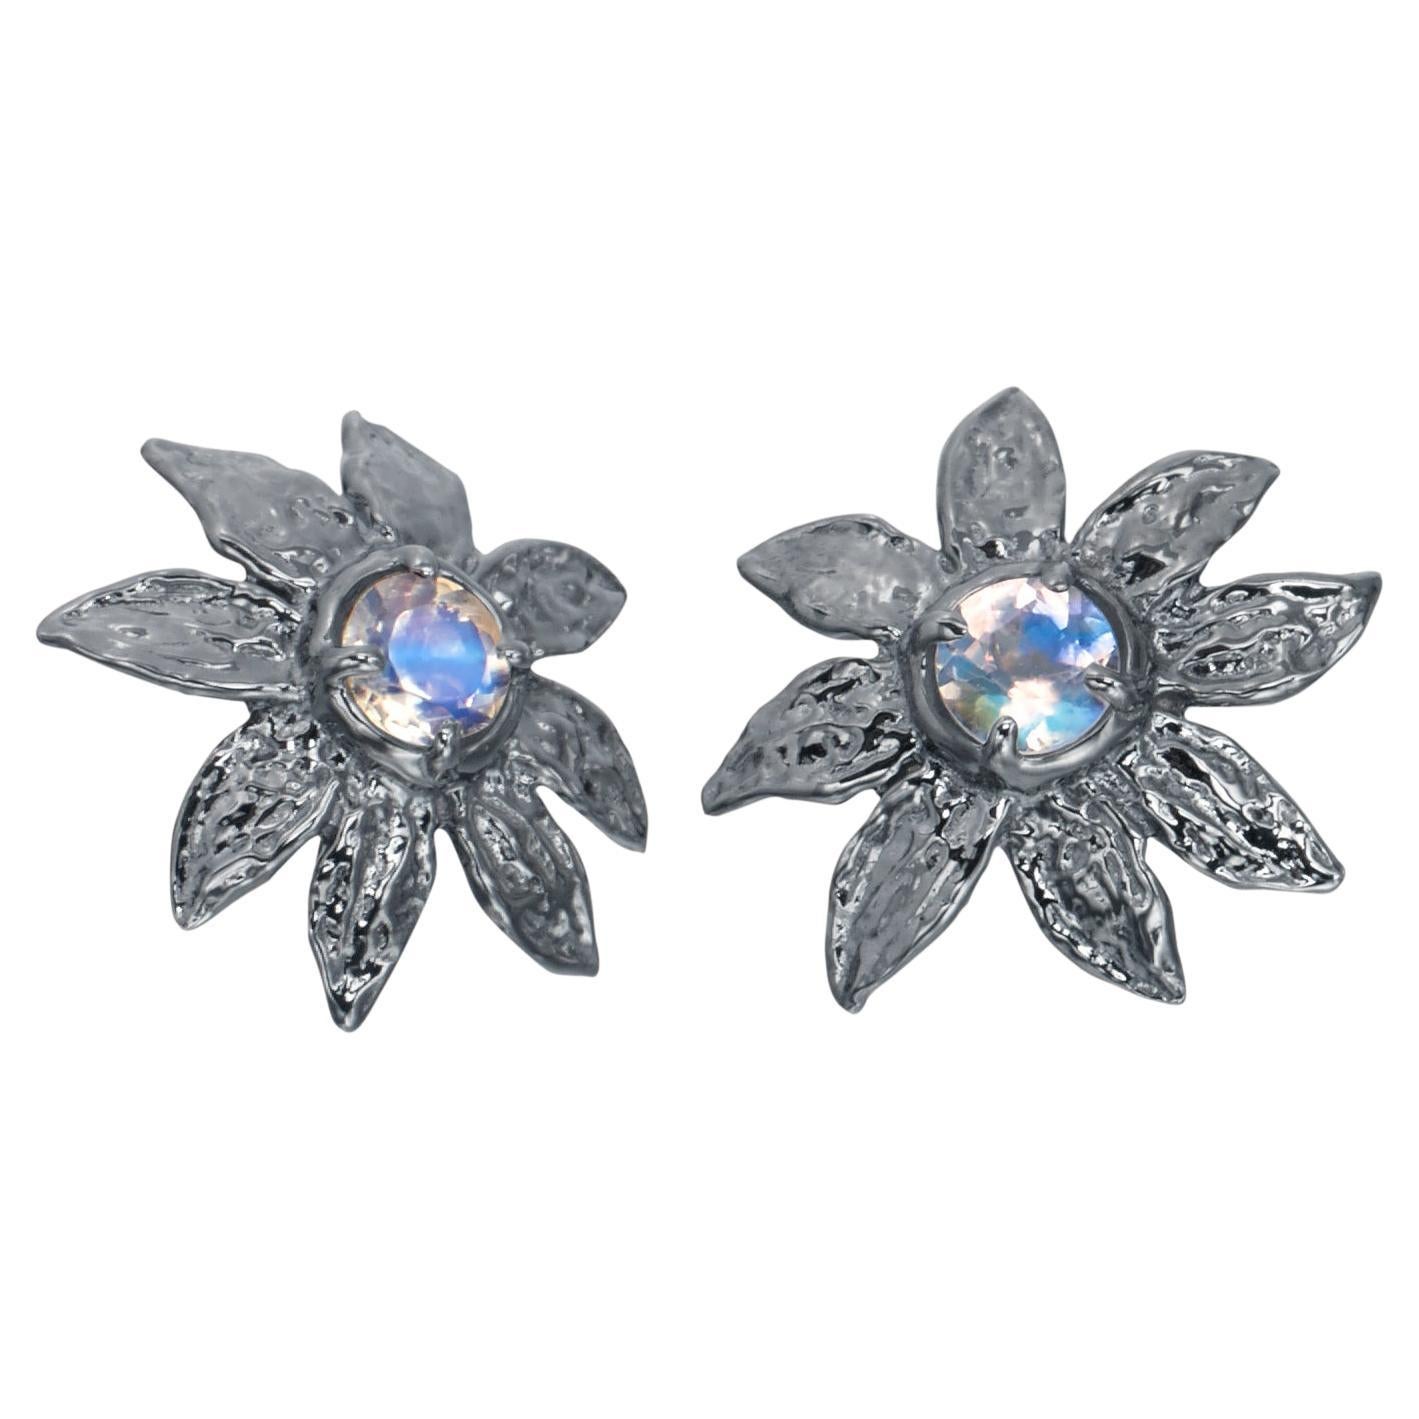 Sterling Silver Flower Stud Earrings with Moonstones with 14 Karat Gold Post